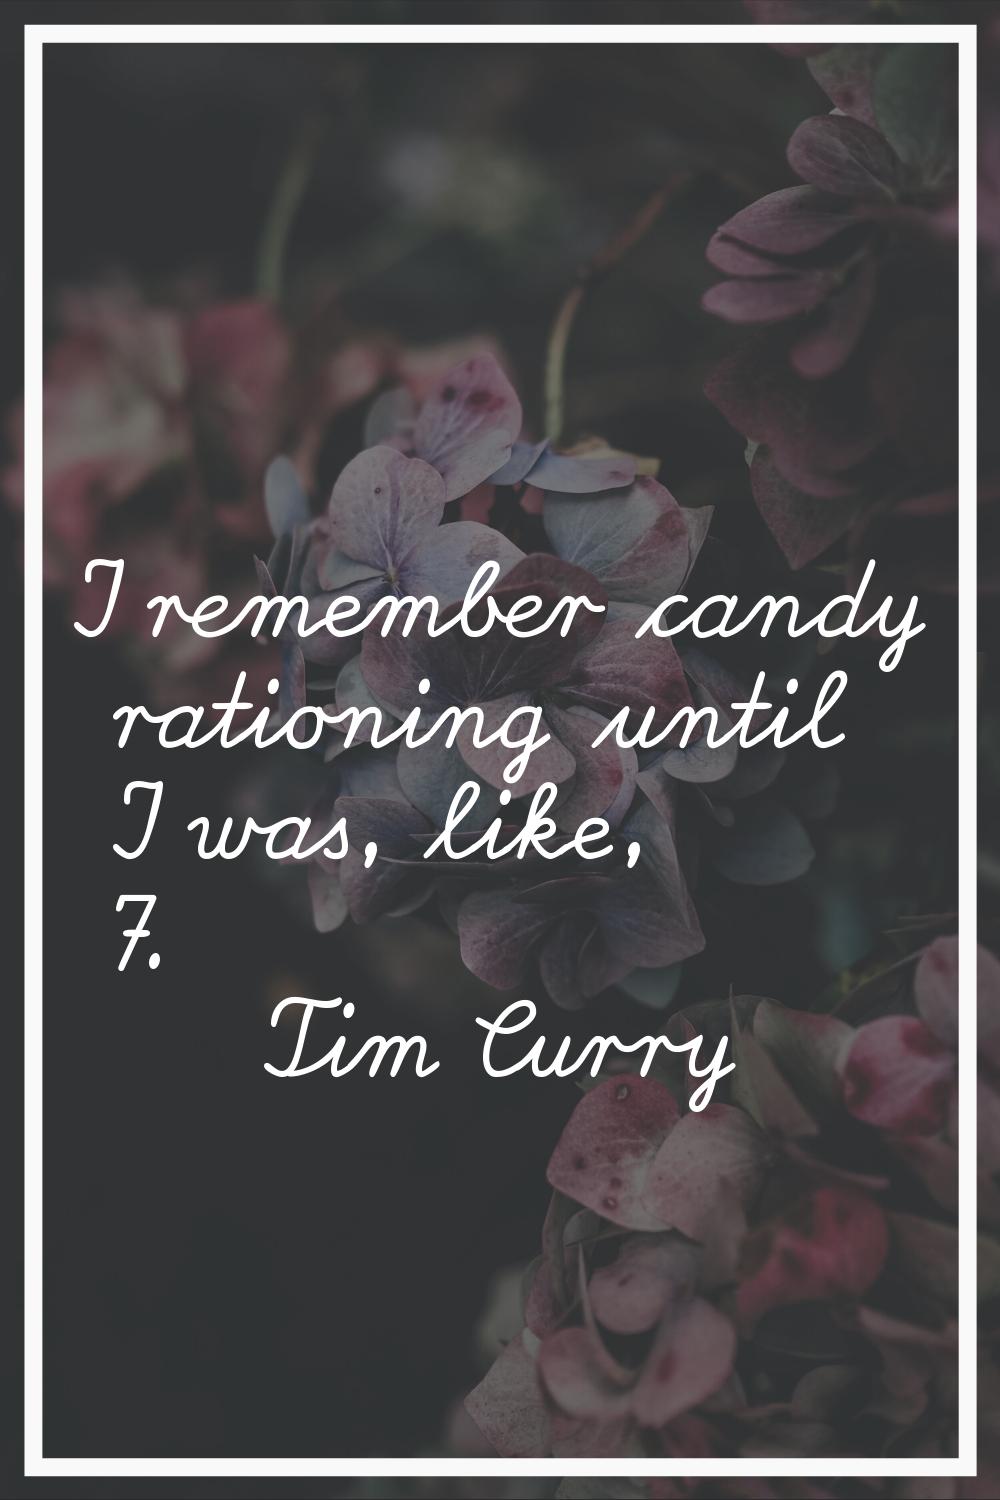 I remember candy rationing until I was, like, 7.